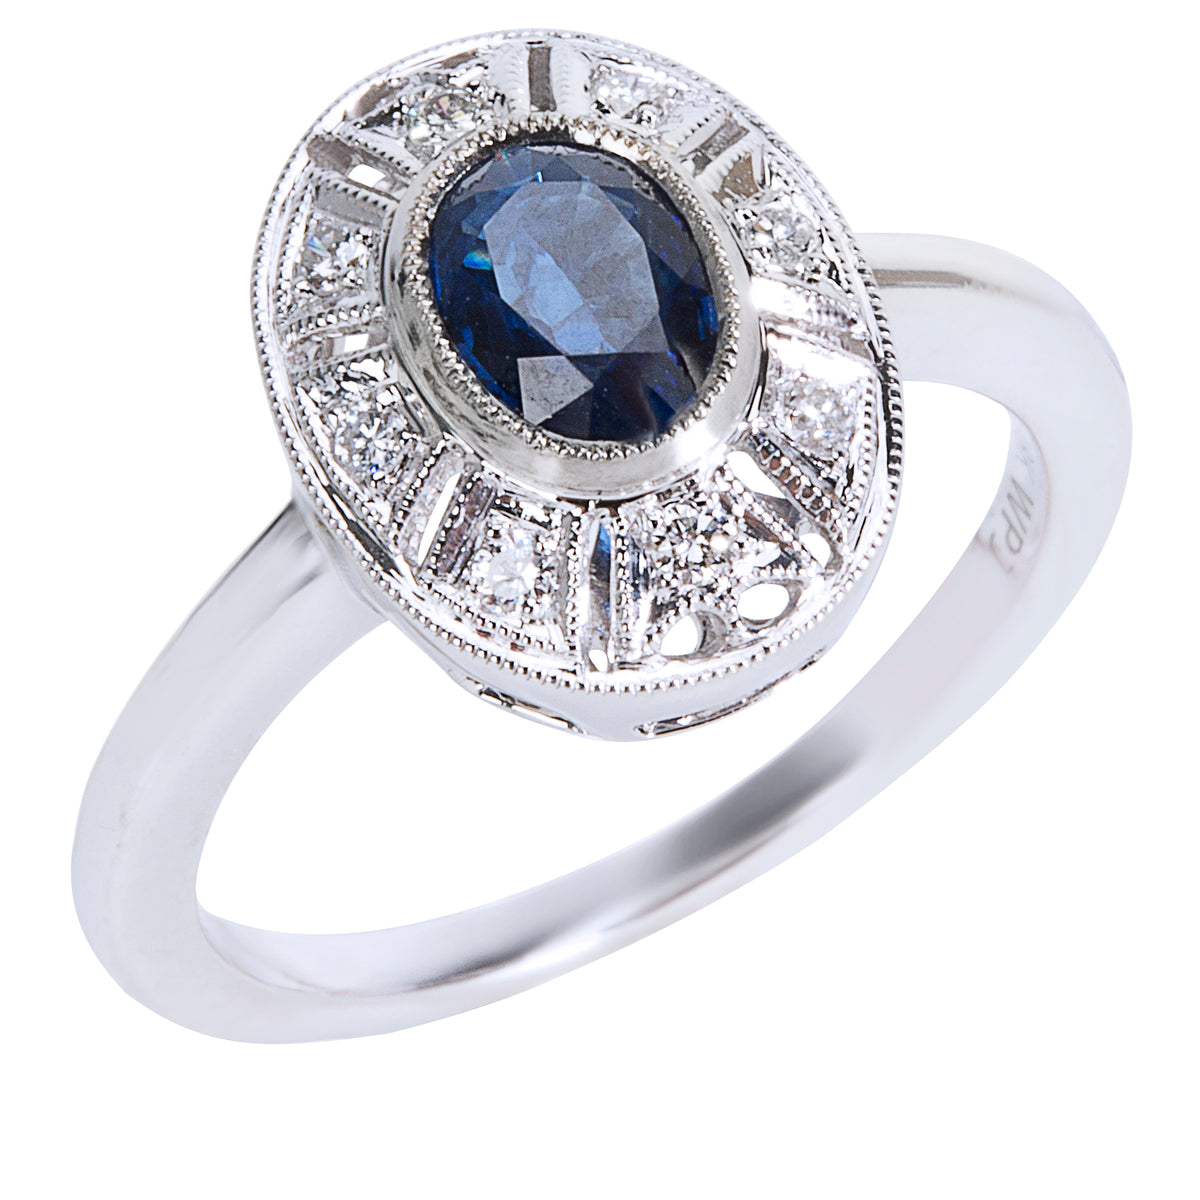 BRAND NEW Diamond & Sapphire Vintage Style Ring in 18K White Gold (0.10 CTW)